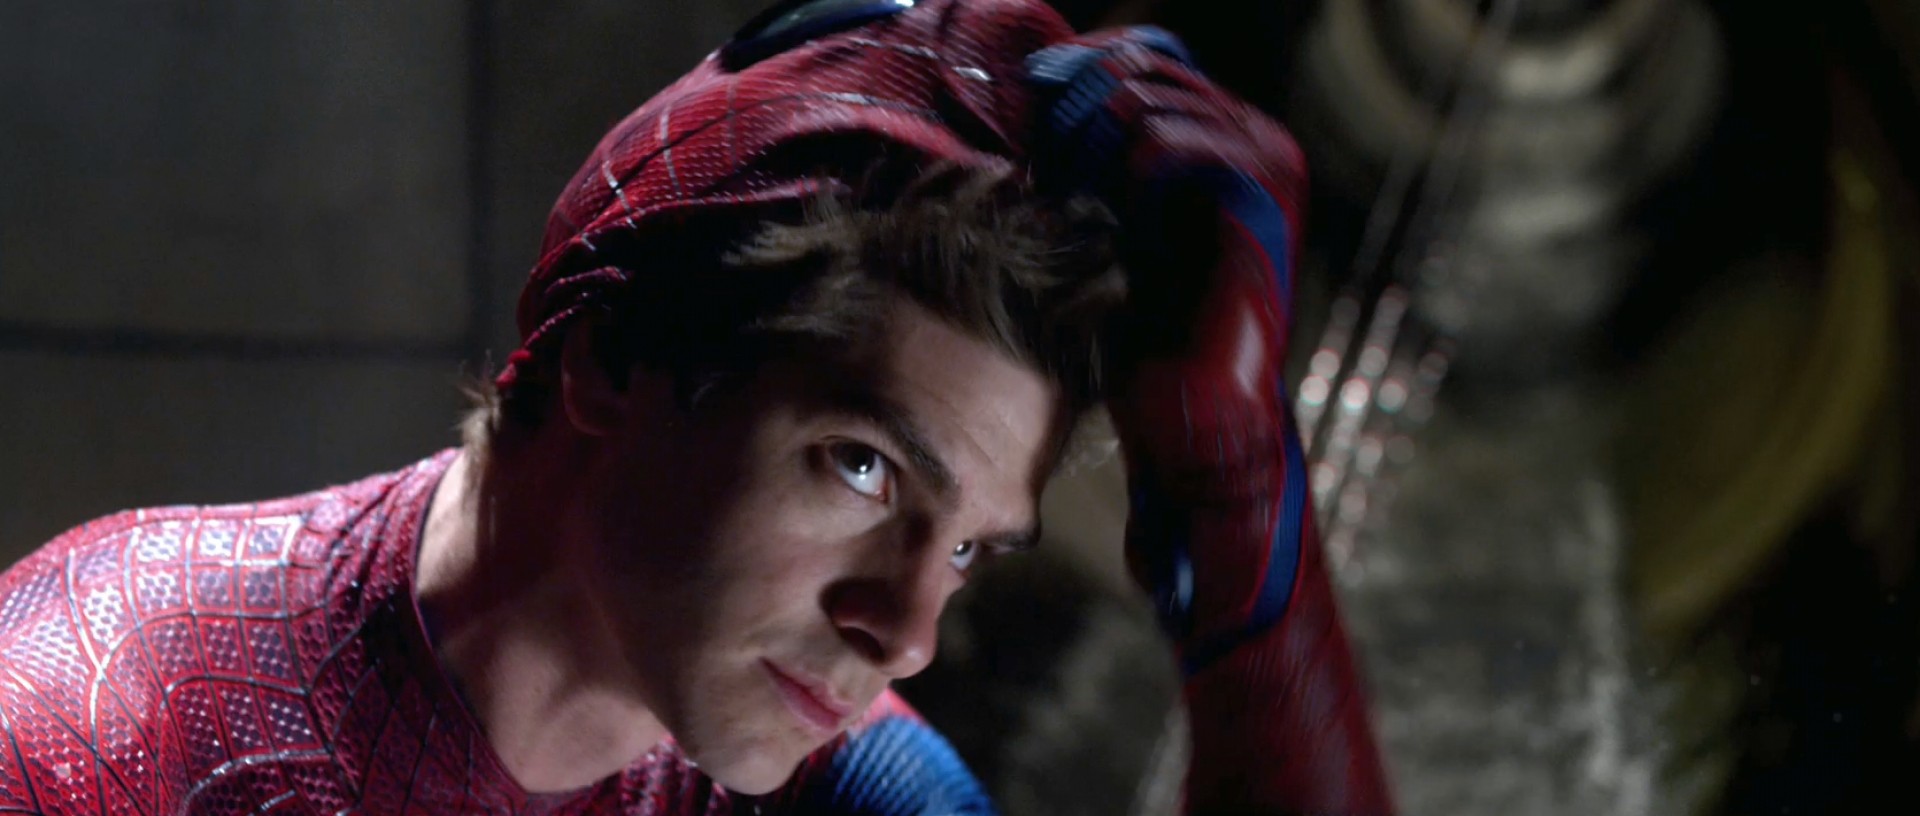 Over the years, the understated and sometimes overlooked Andrew Garfield